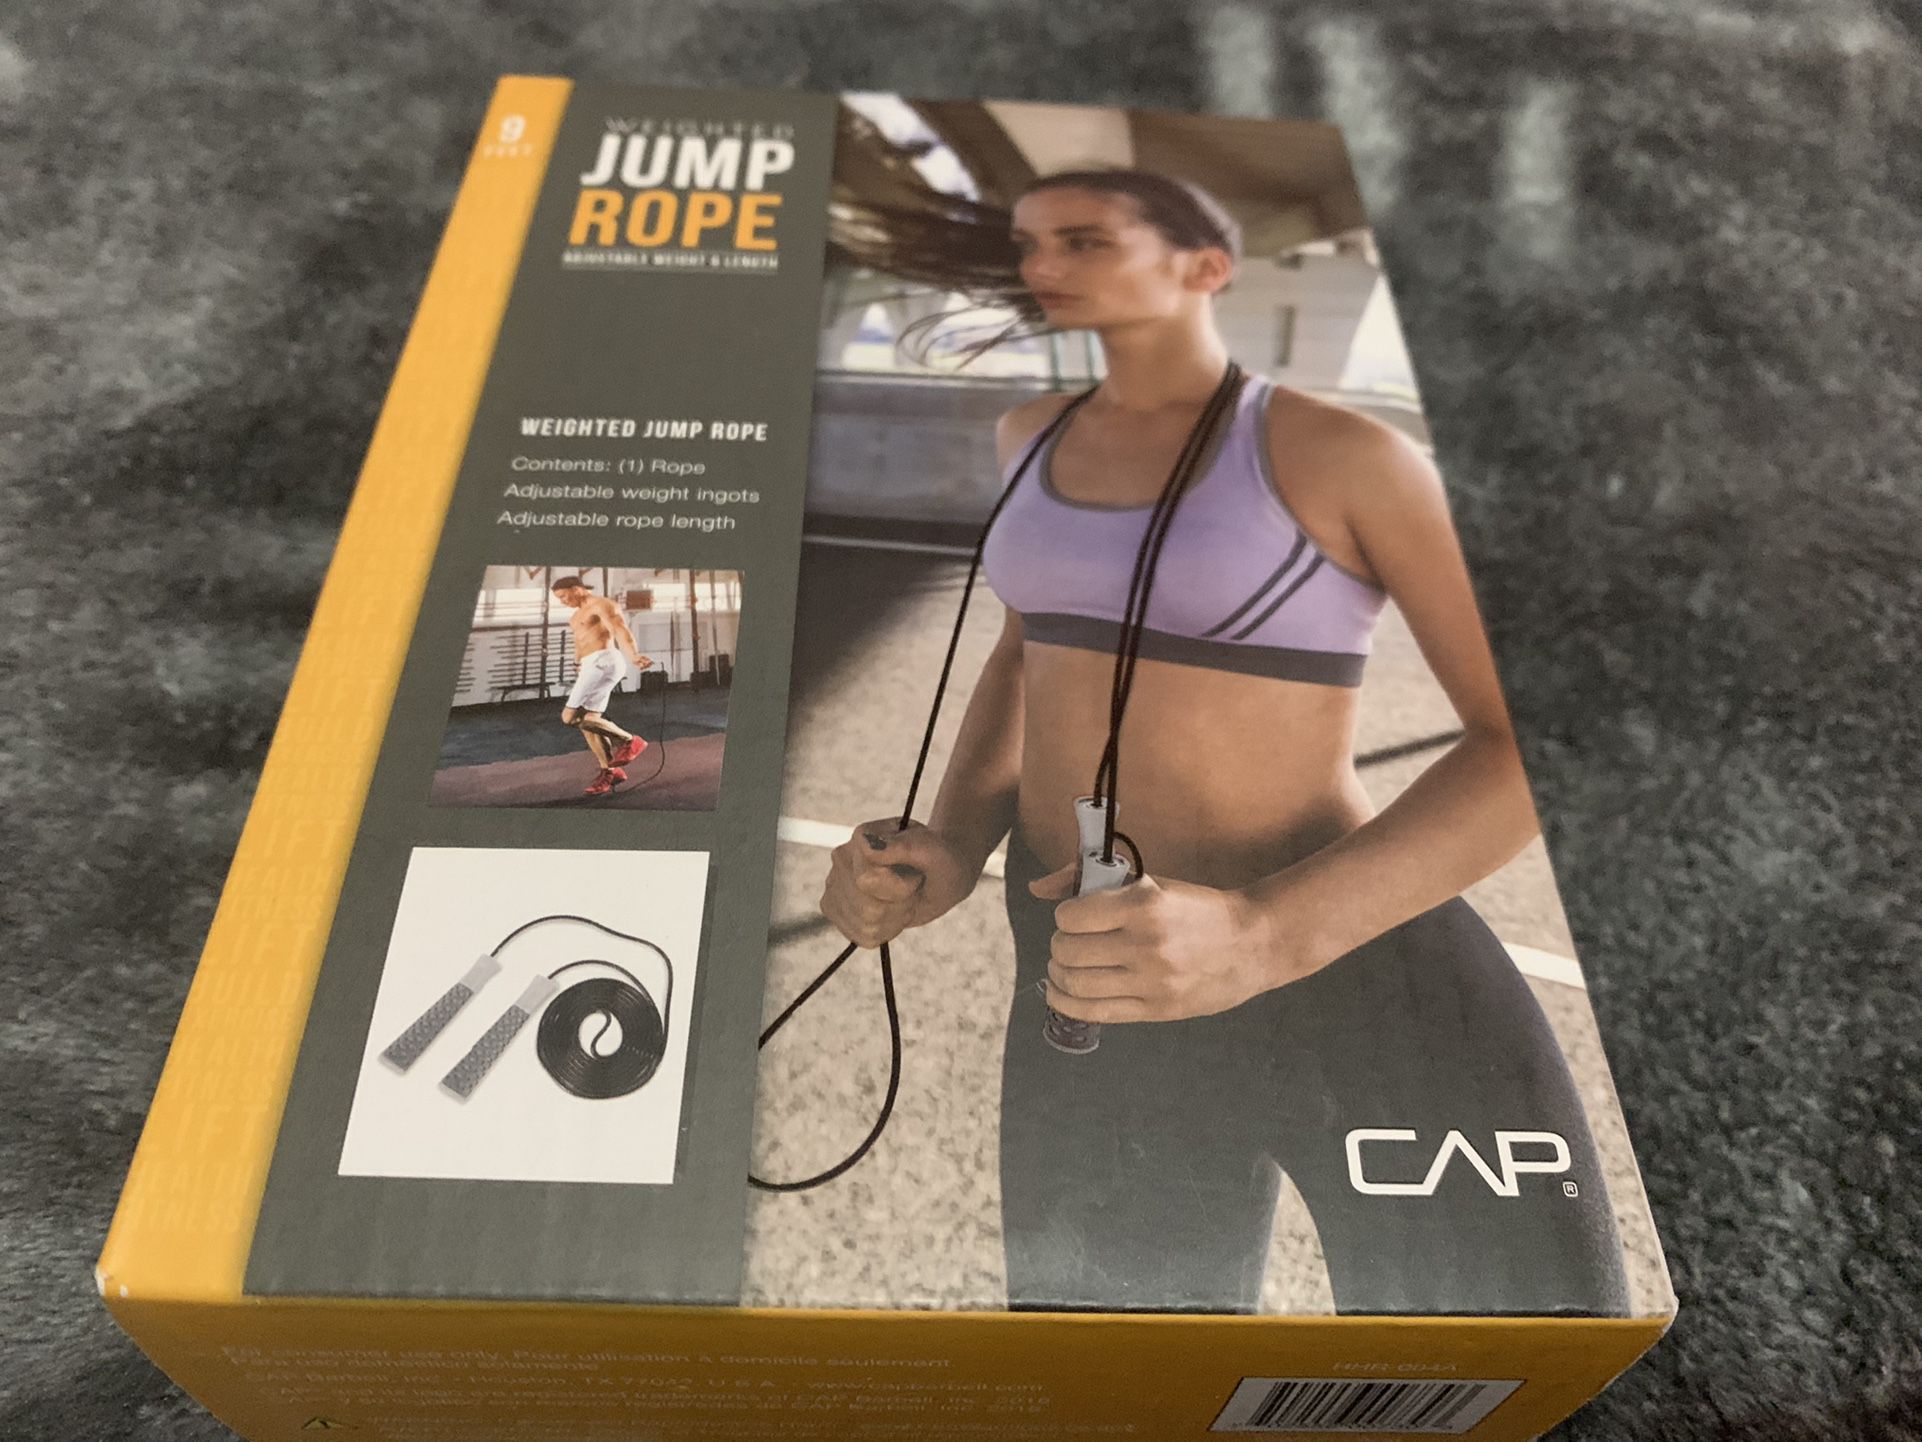 Cap Weighted Jump Rope